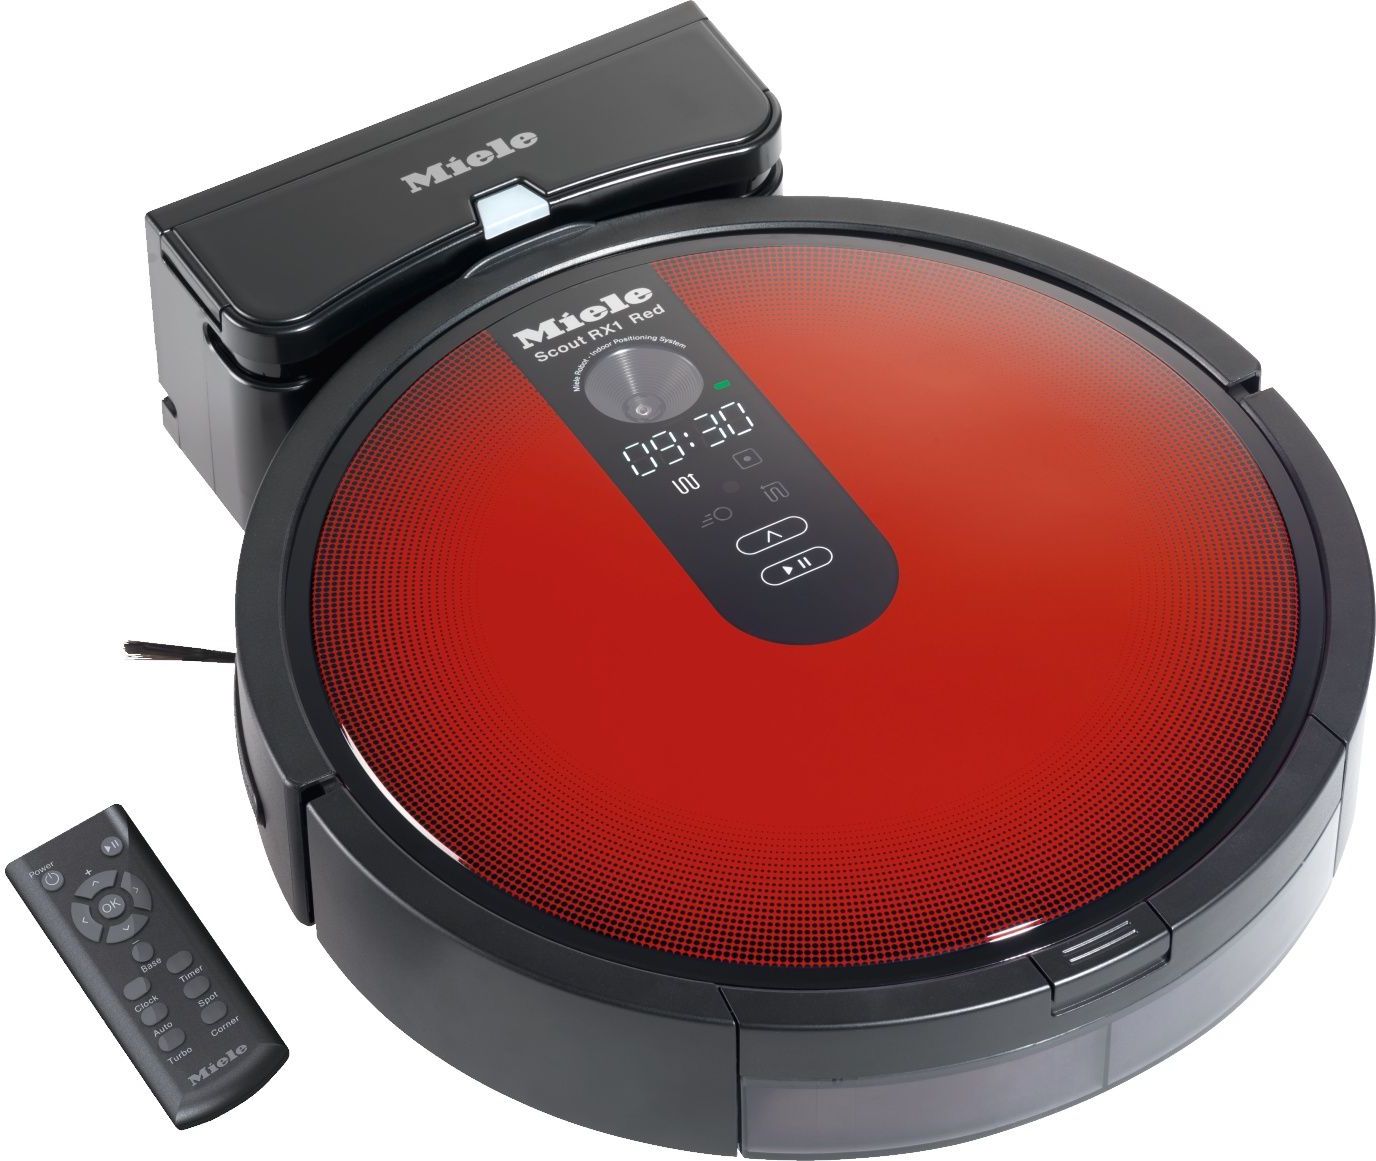 peave Hotel Låne Miele Scout RX1 Red Robotic Vacuum-Red-41JQL000USA | Johnson Mertz